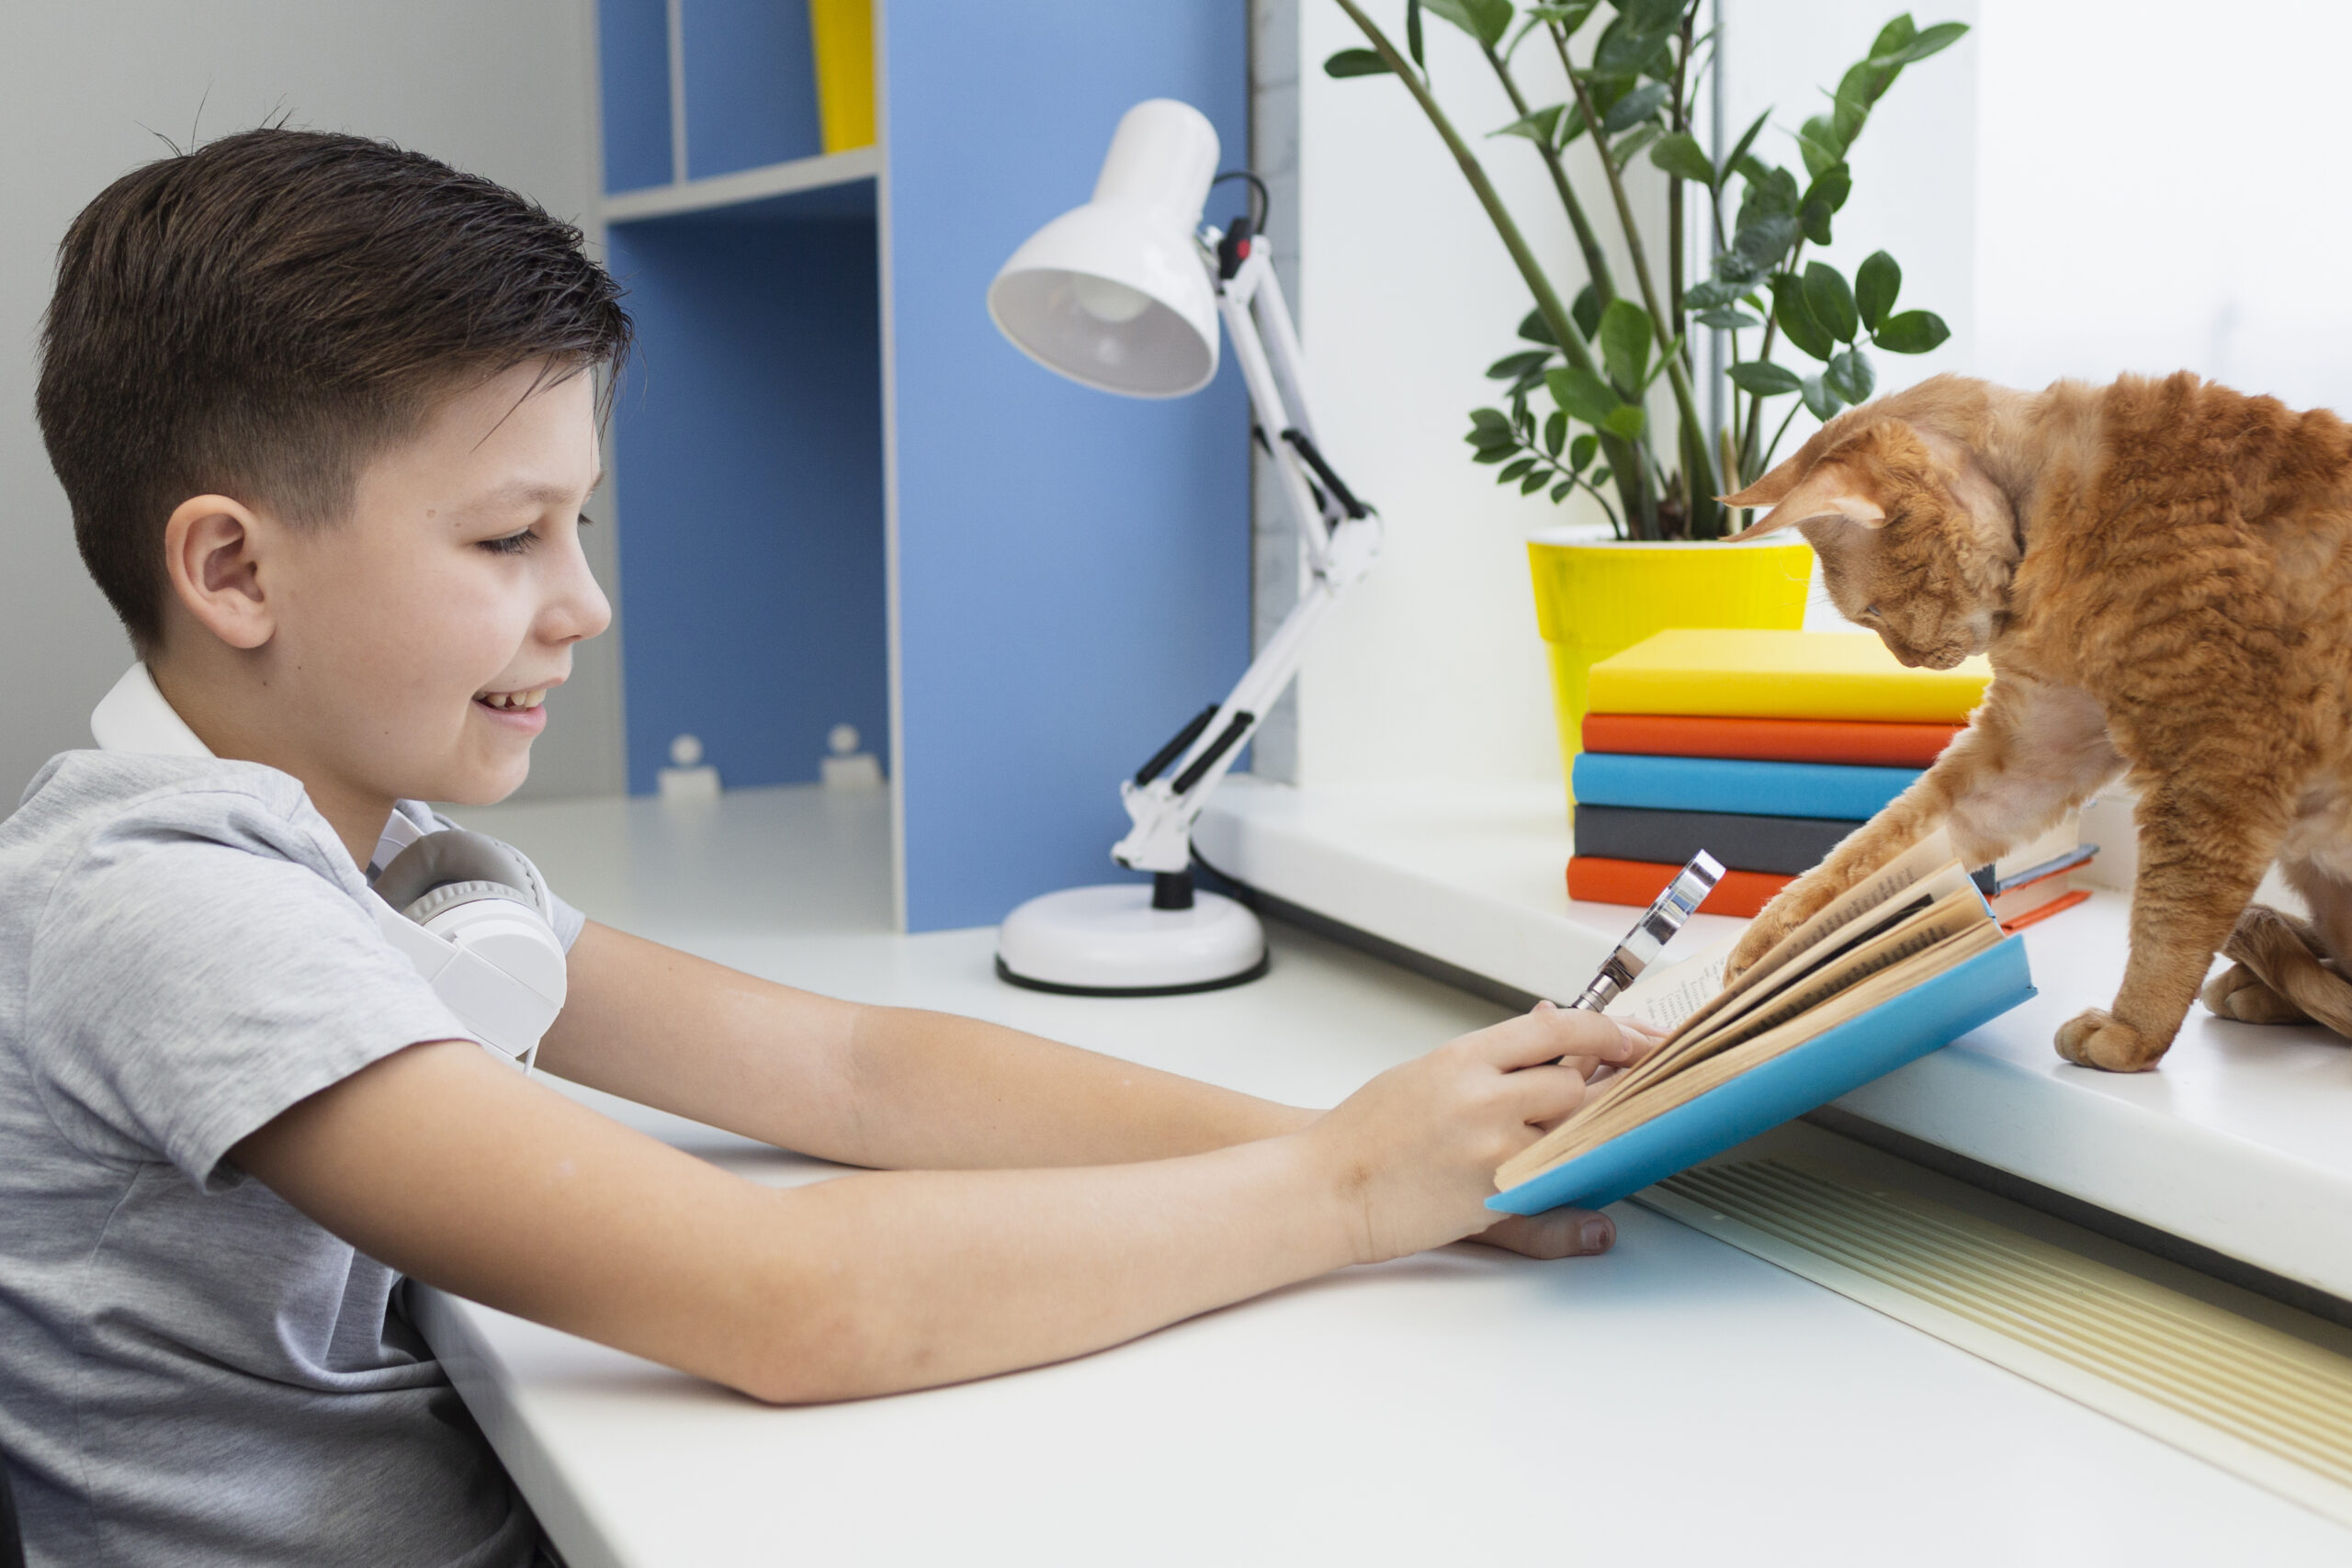 10 Important Skills to Help Your Child Succeed